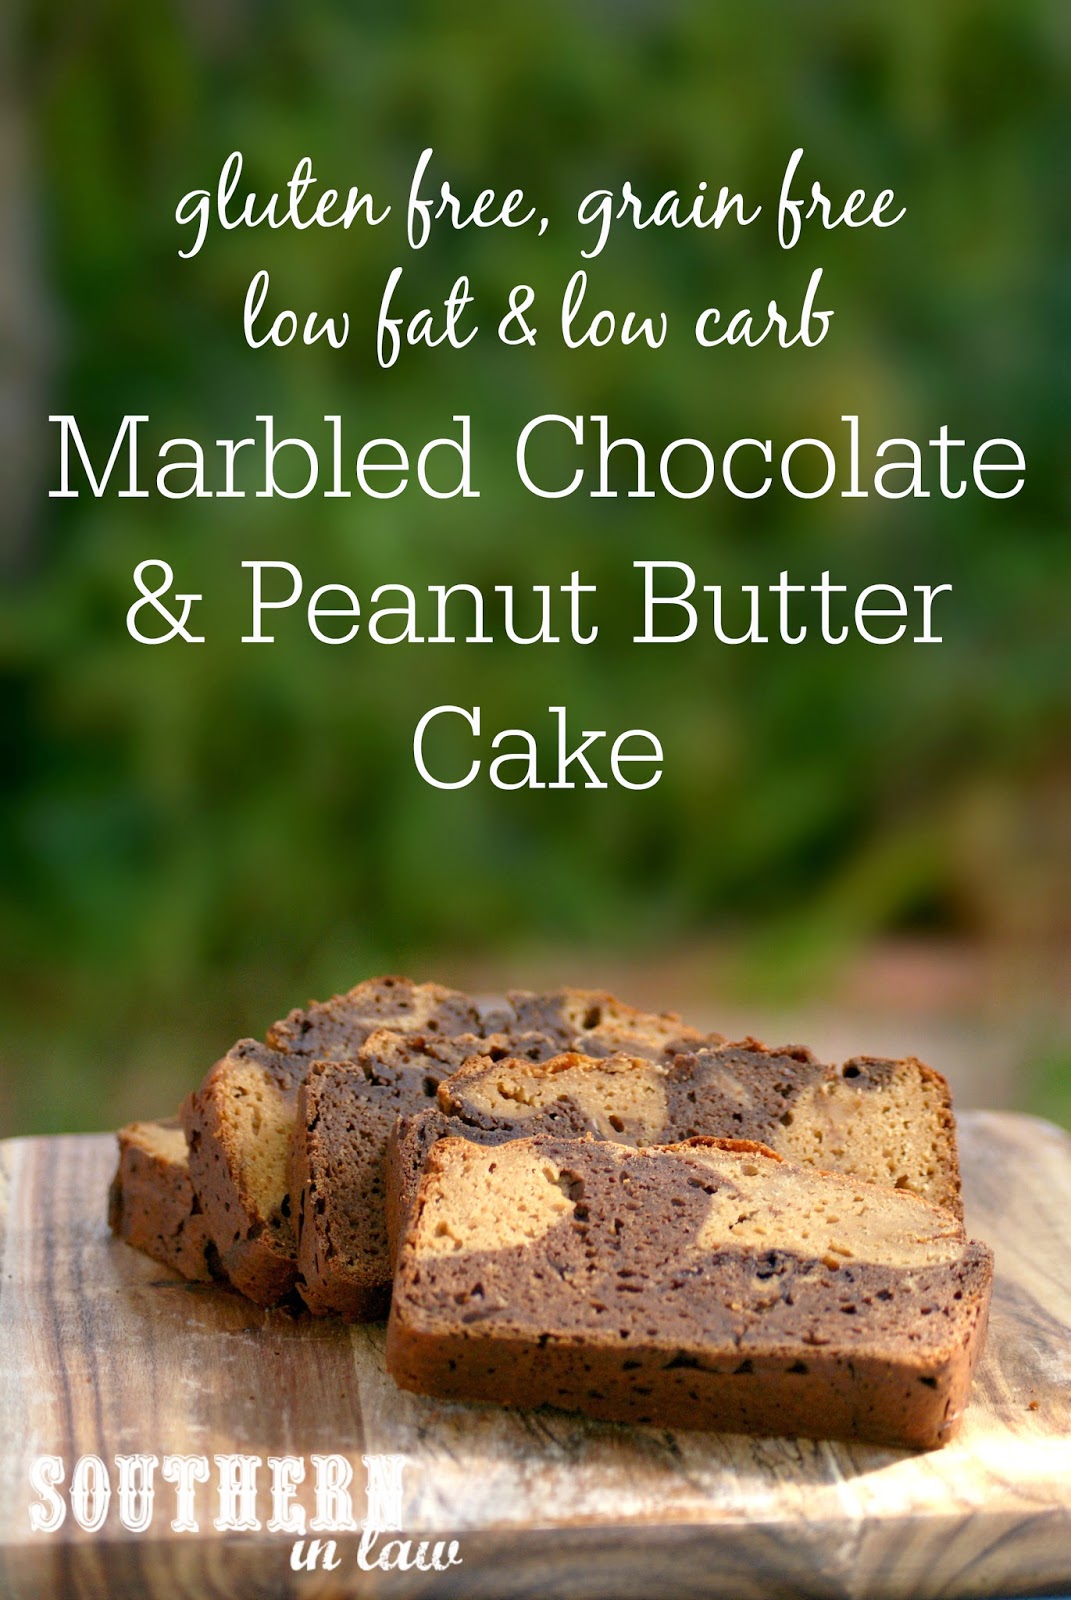 Healthy, High Protein Marbled Chocolate and Peanut Butter Cake - low fat, gluten free, low carb, high protein, grain free, refined sugar free